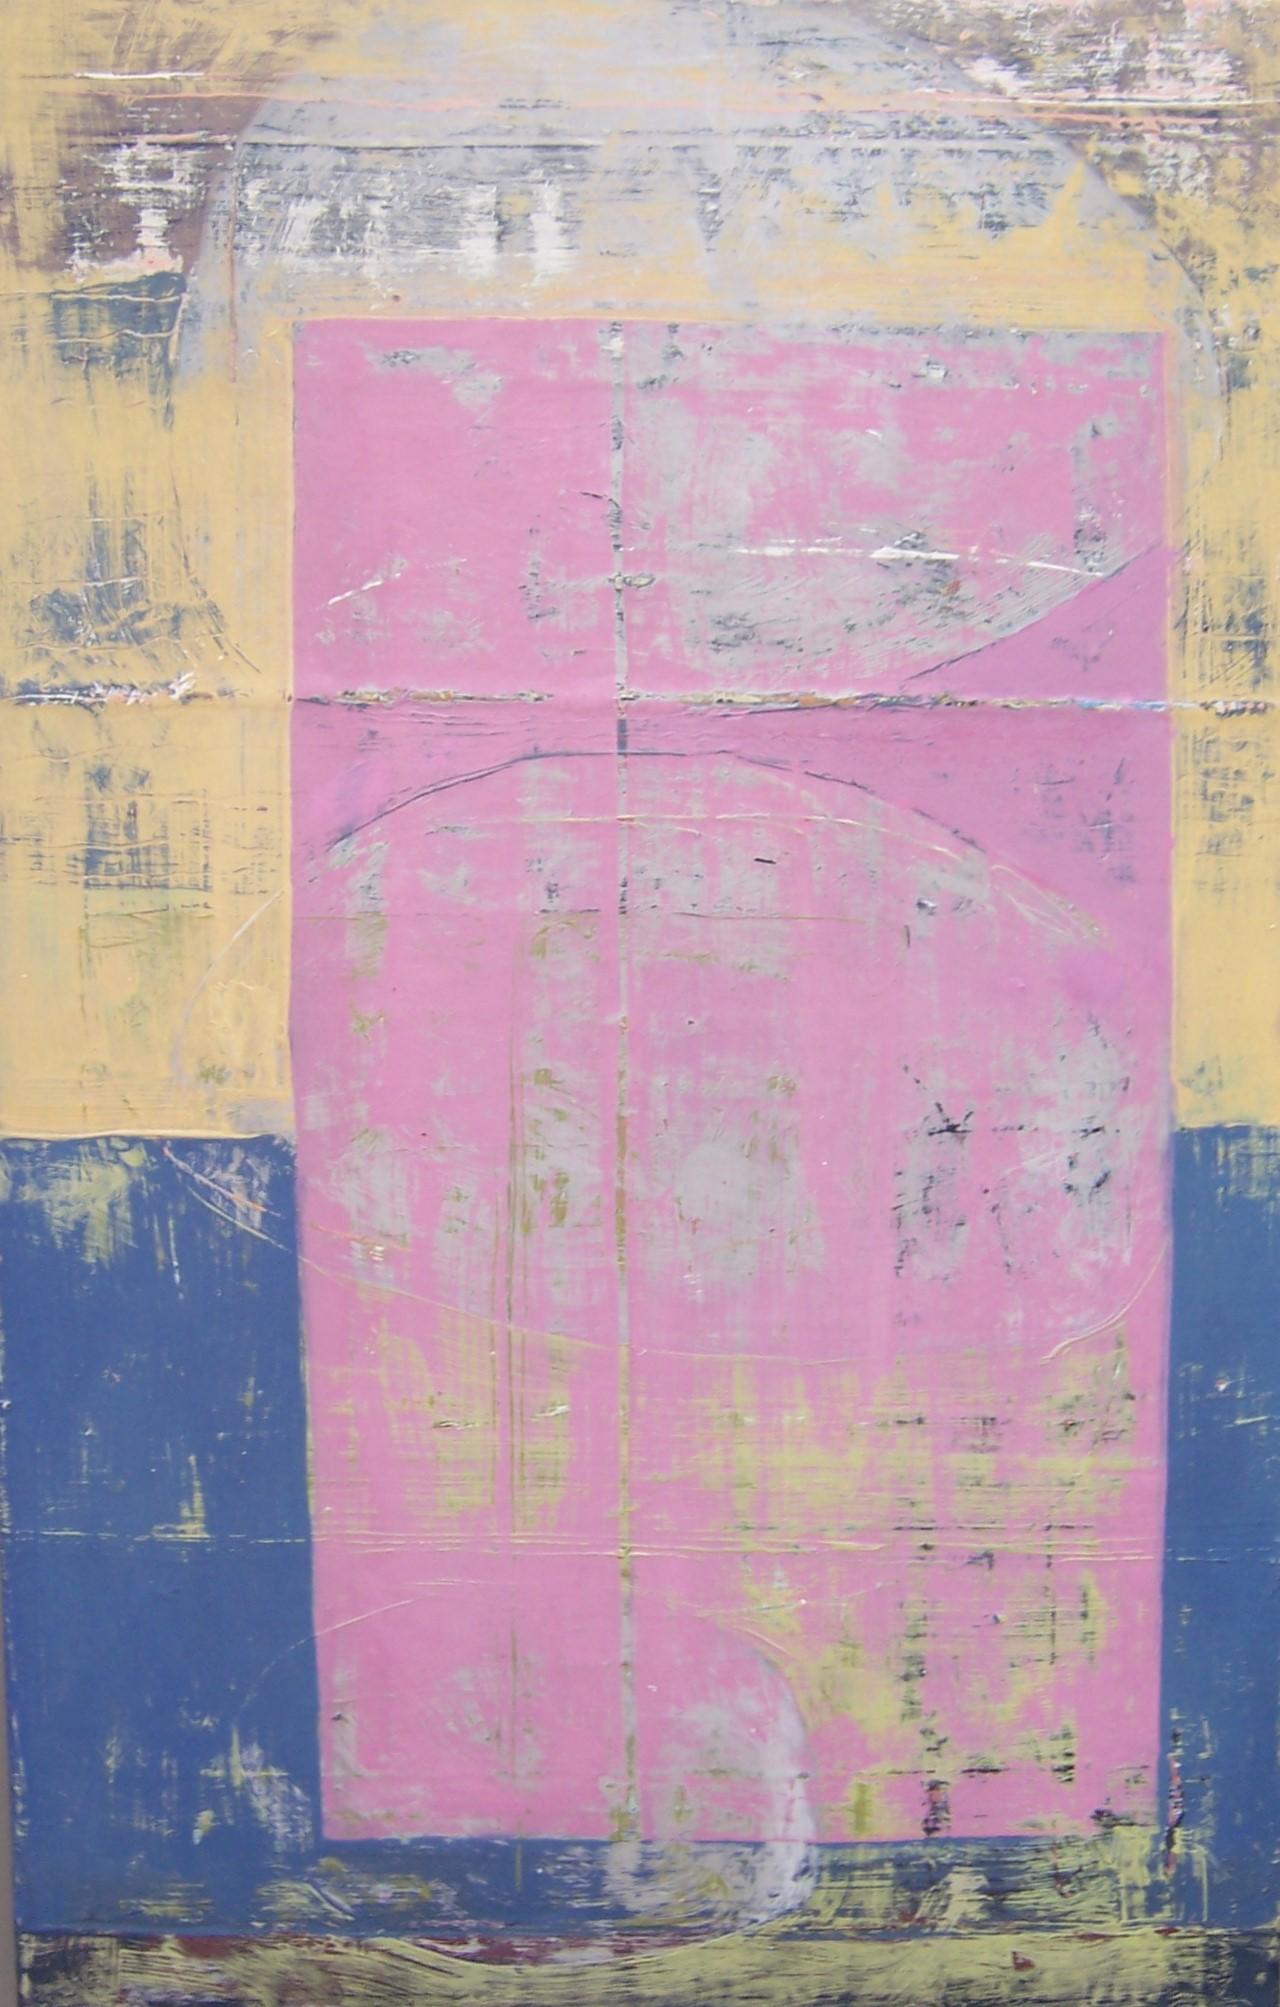 Rock 191: Pink Angel, pink, yellow and blue abstract oil painting